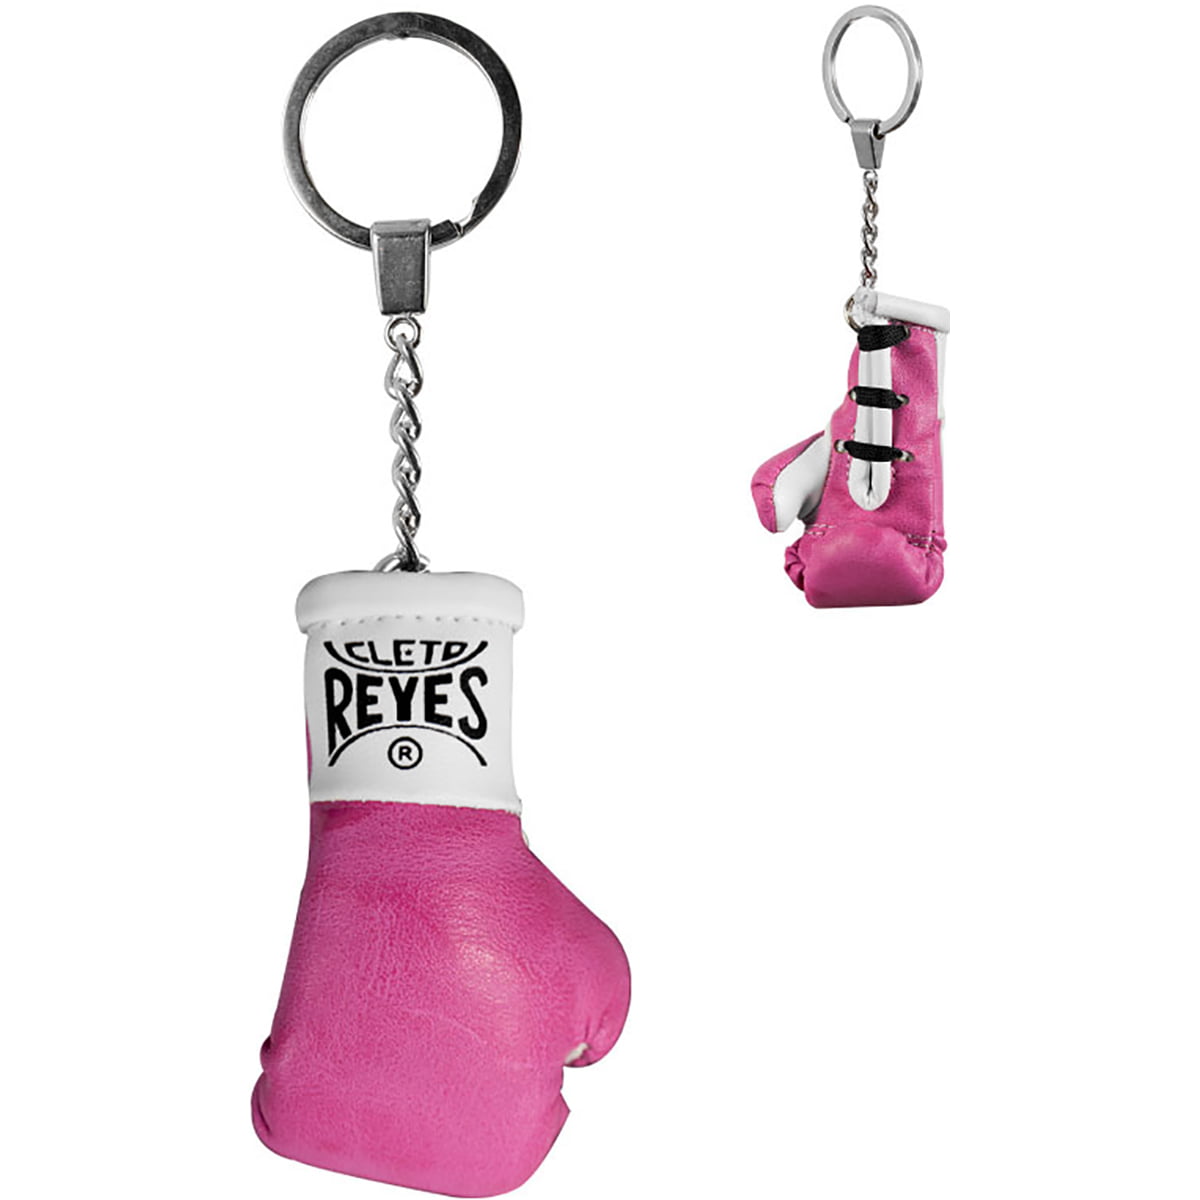 PRO Boxeo Professional Authentic PRO Mini Key Chain Boxing Gloves Mexican Flag 